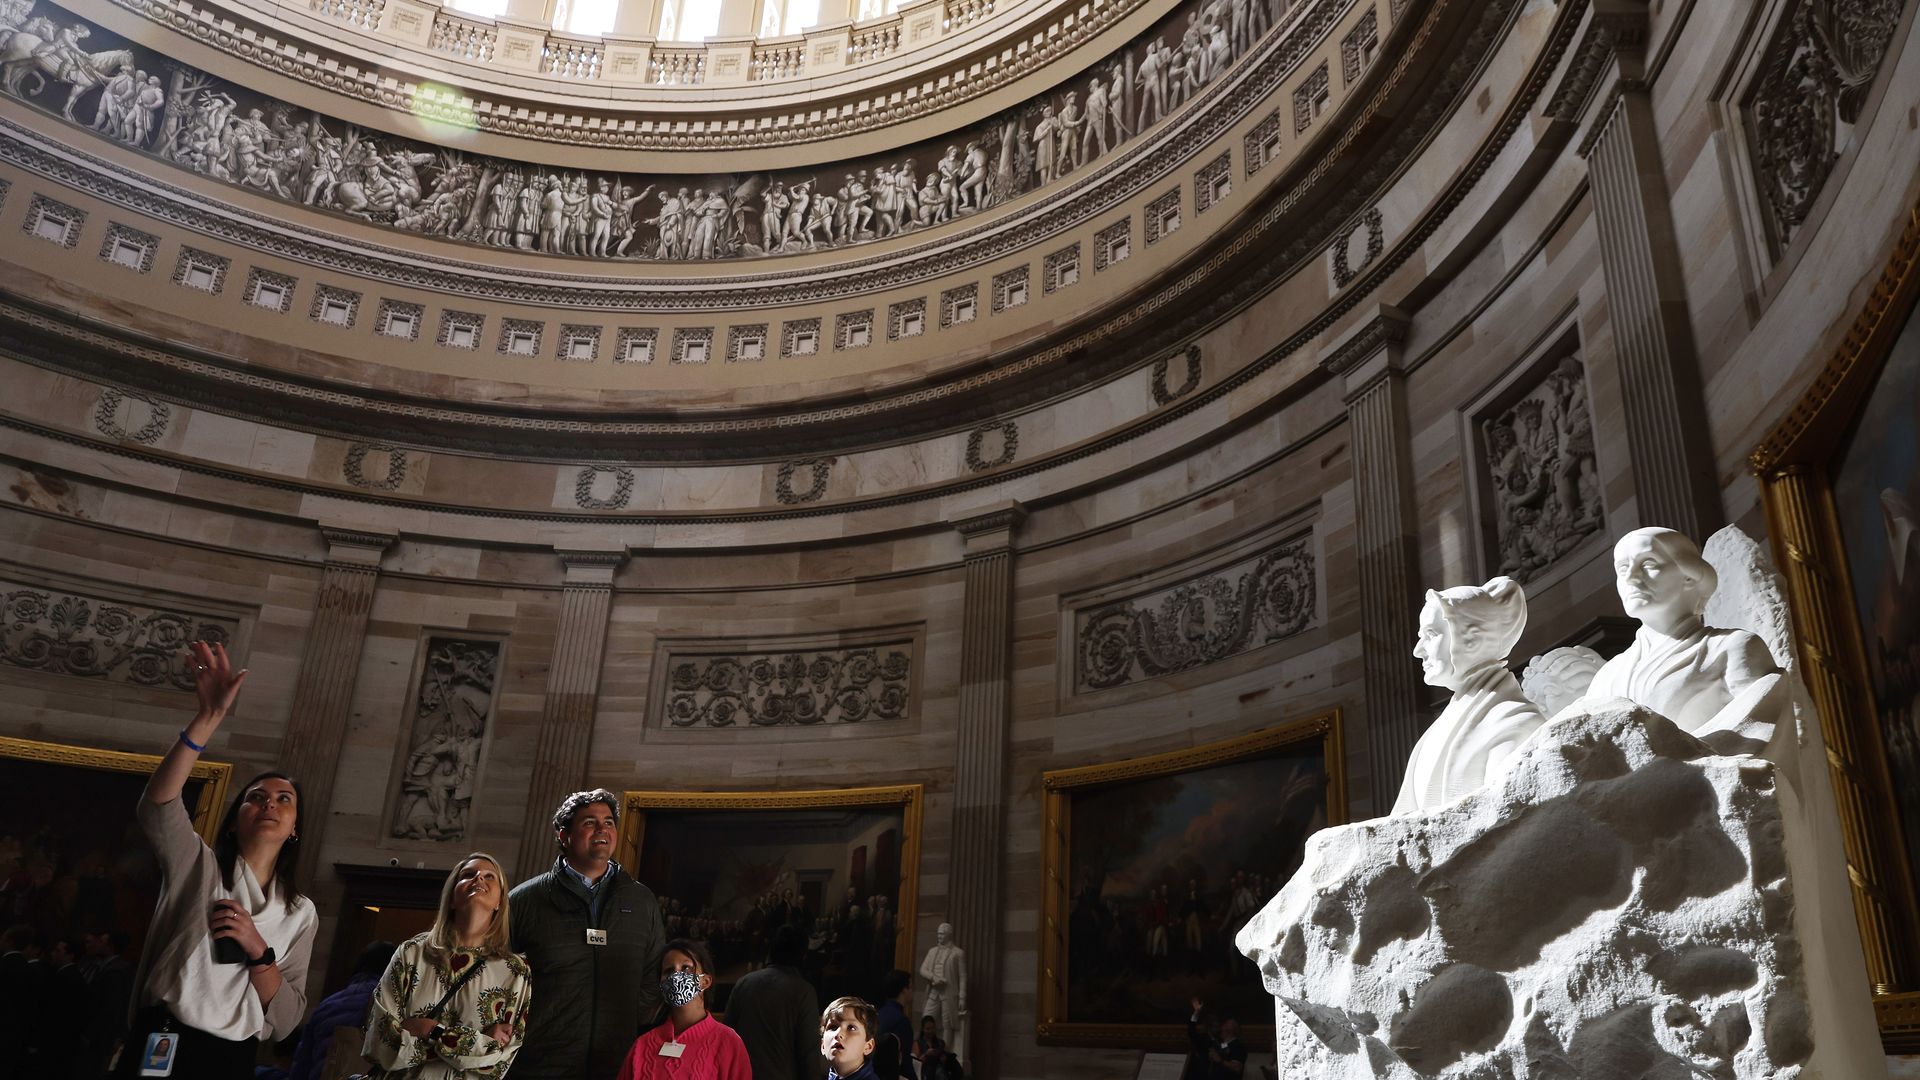 Members of the public are seen looking at the Capitol Dome as public tours resumed.